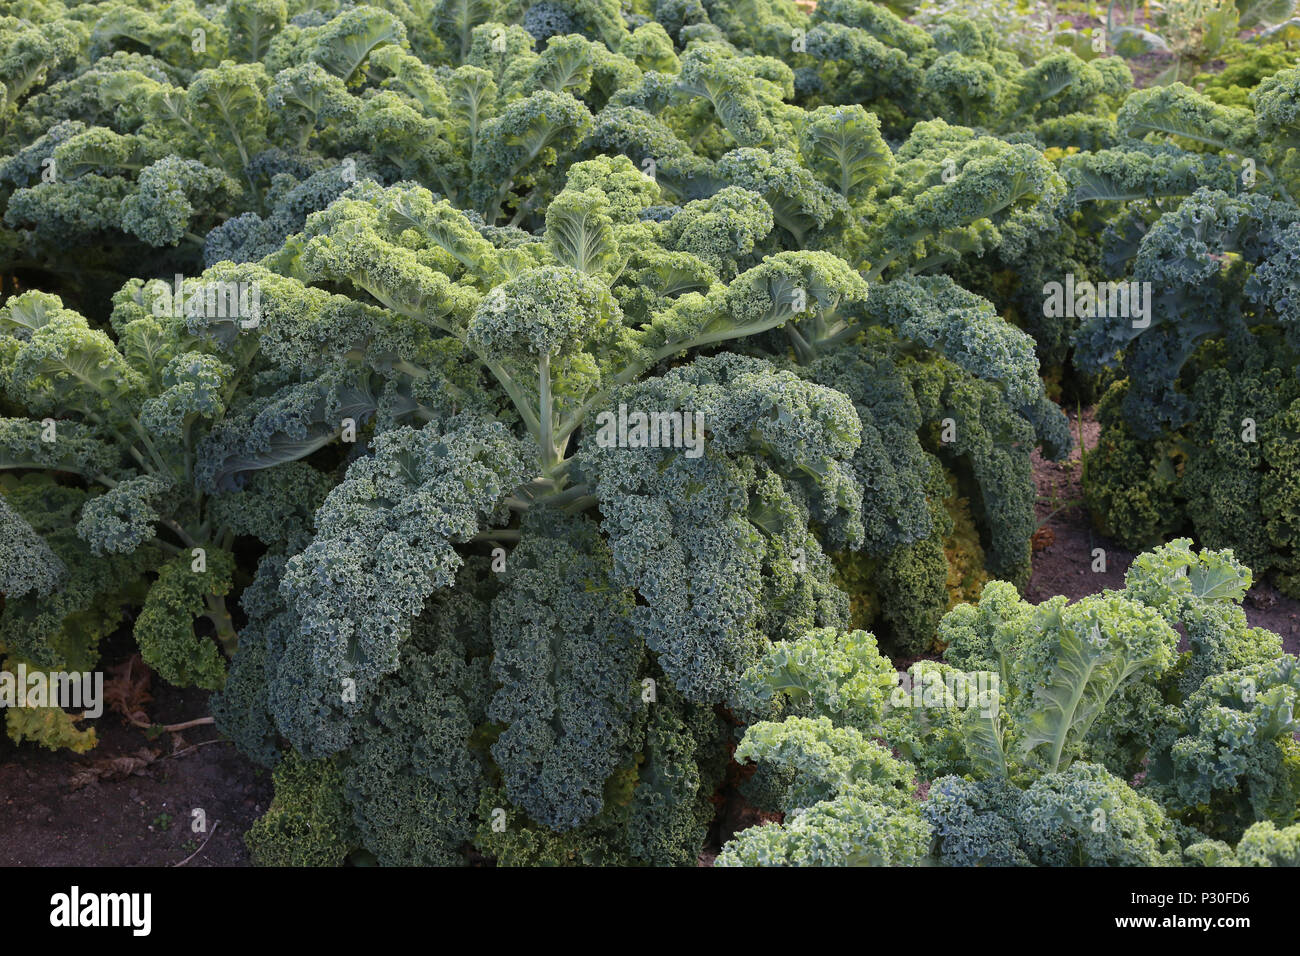 Eutin, Germany, close-up of green cabbage Stock Photo